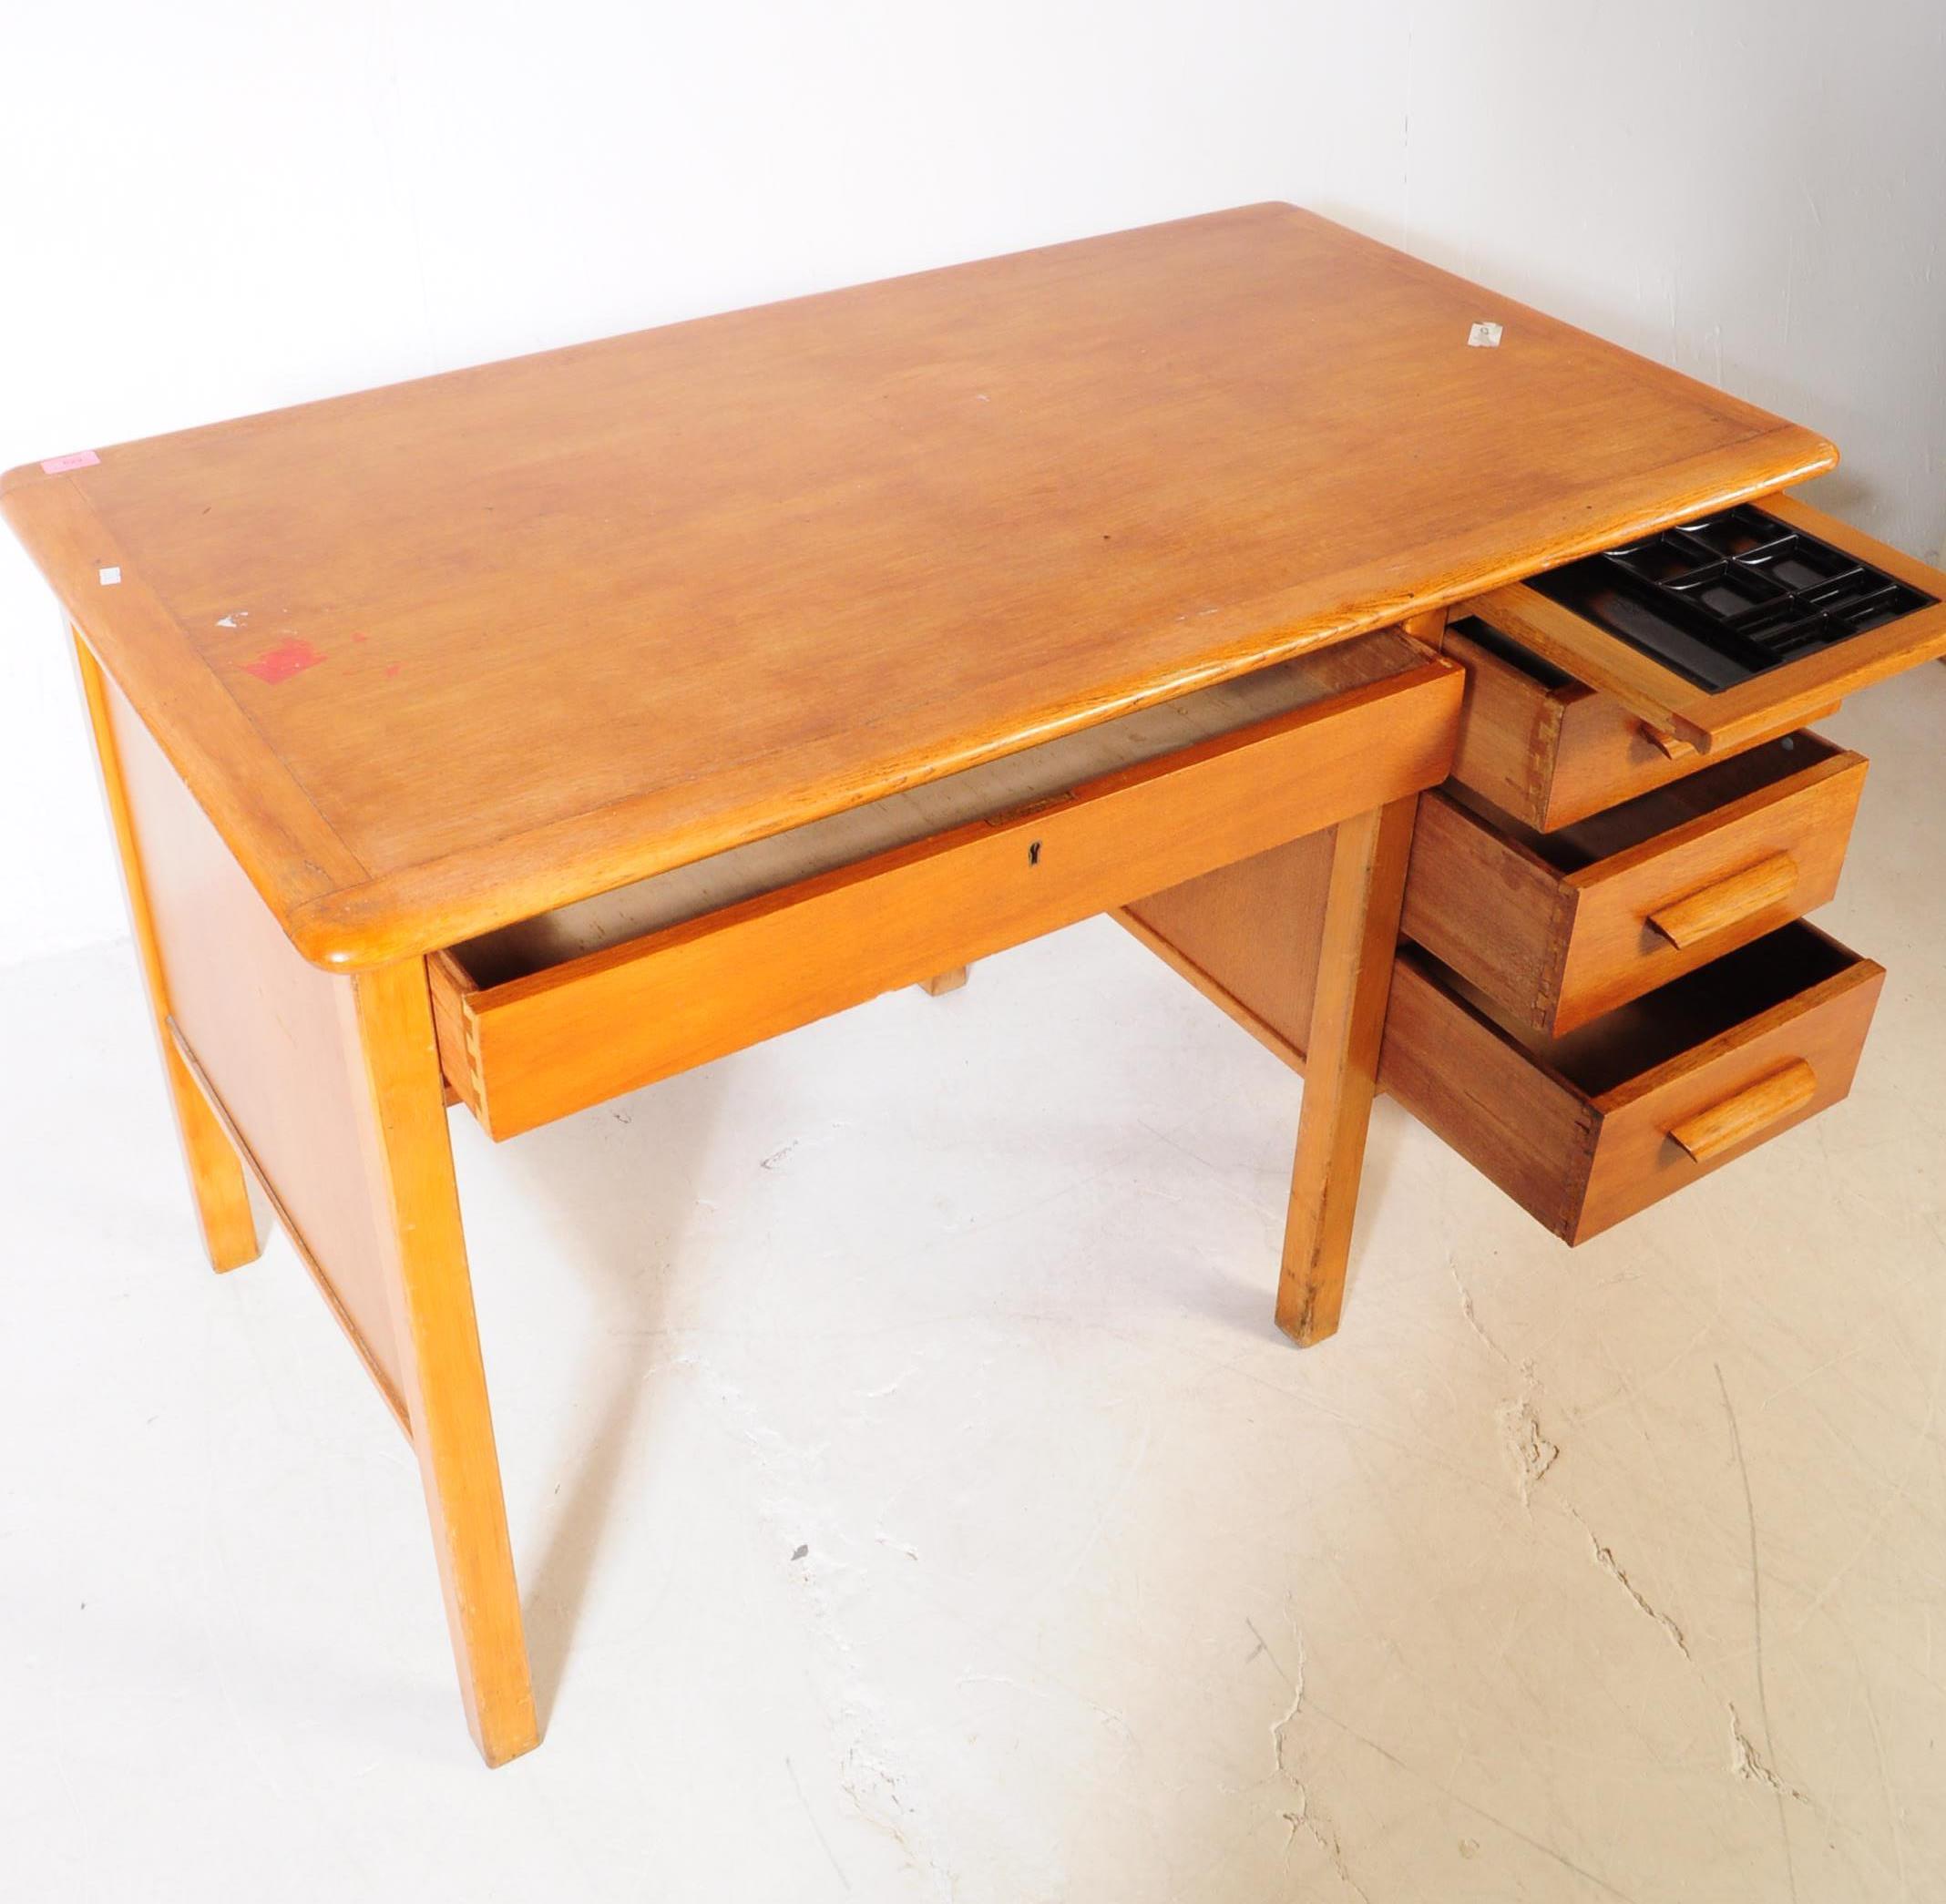 VINTAGE 20TH CENTURY 1940S OAK AIR MINISTRY OFFICE DESK - Image 2 of 5